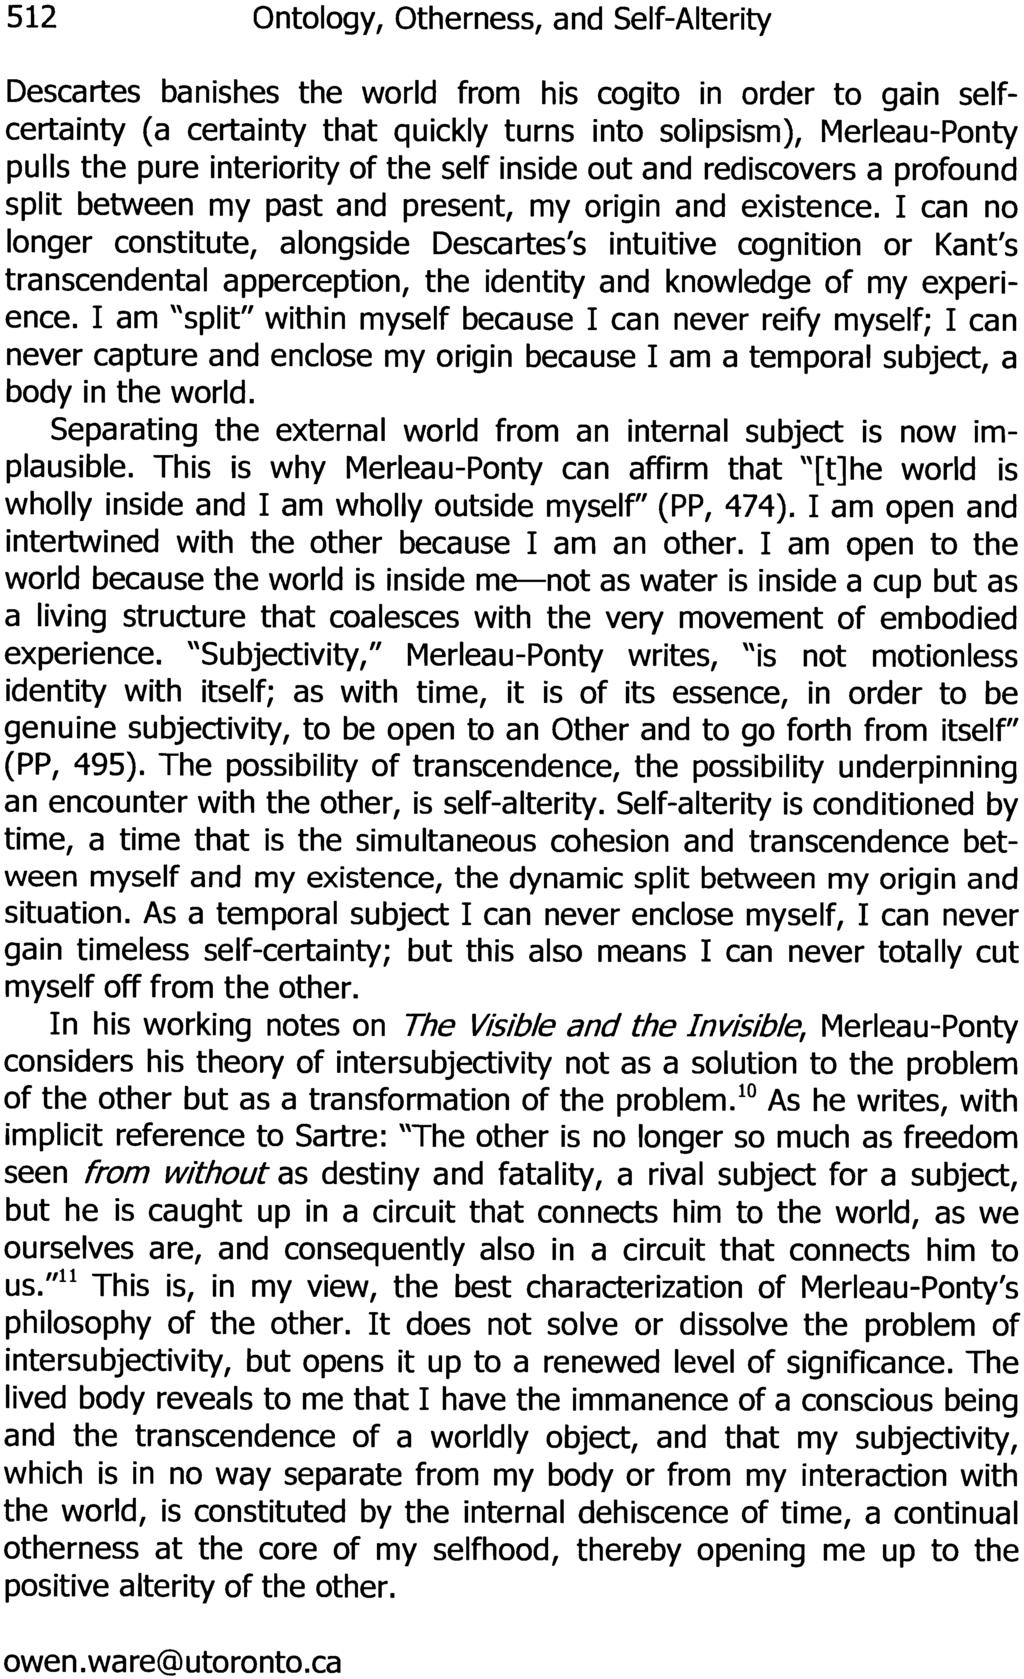 512 Ontology, Otherness, and Self-Alterity Descartes banishes the world from his cogito in order to gain selfcertainty (a certainty that quickly turns into solipsisrn), Merleau-Ponty pulls the pure